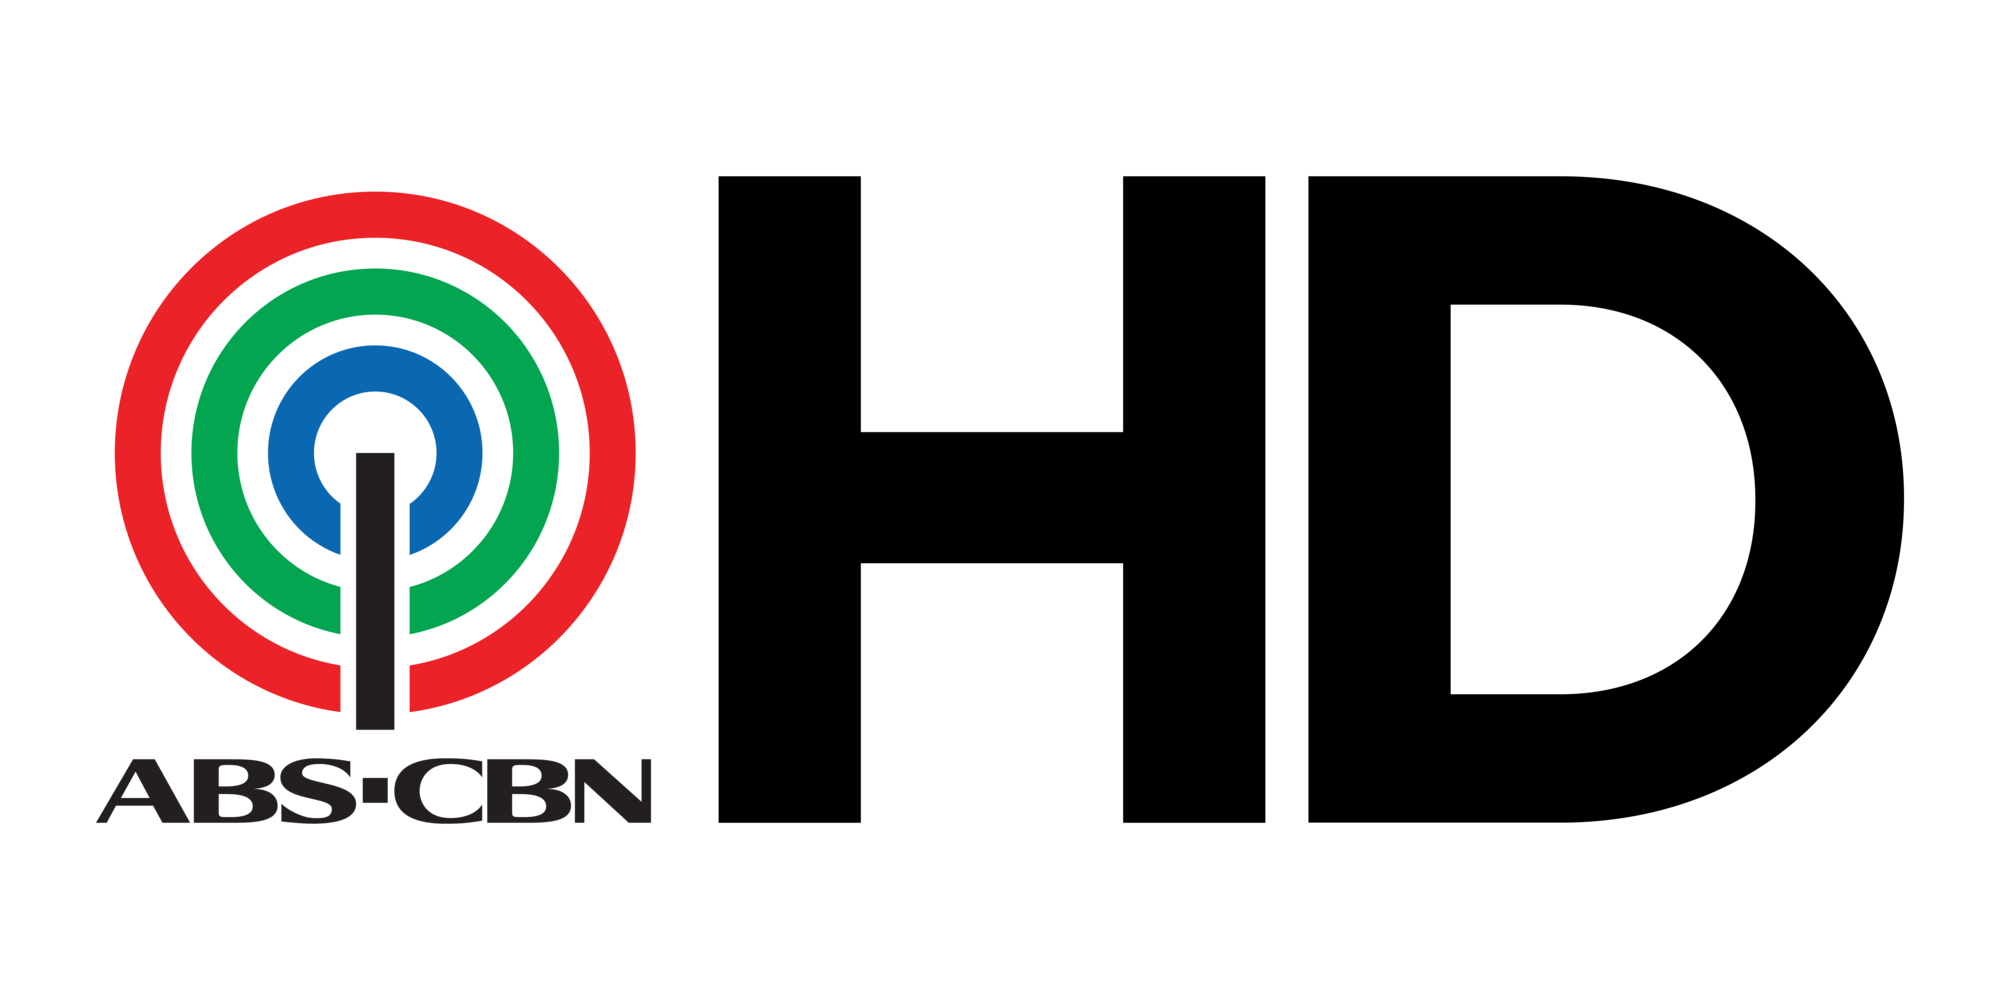 Logo Abs Cbn Png - Abs Cbn Hd Logo.png, Transparent background PNG HD thumbnail